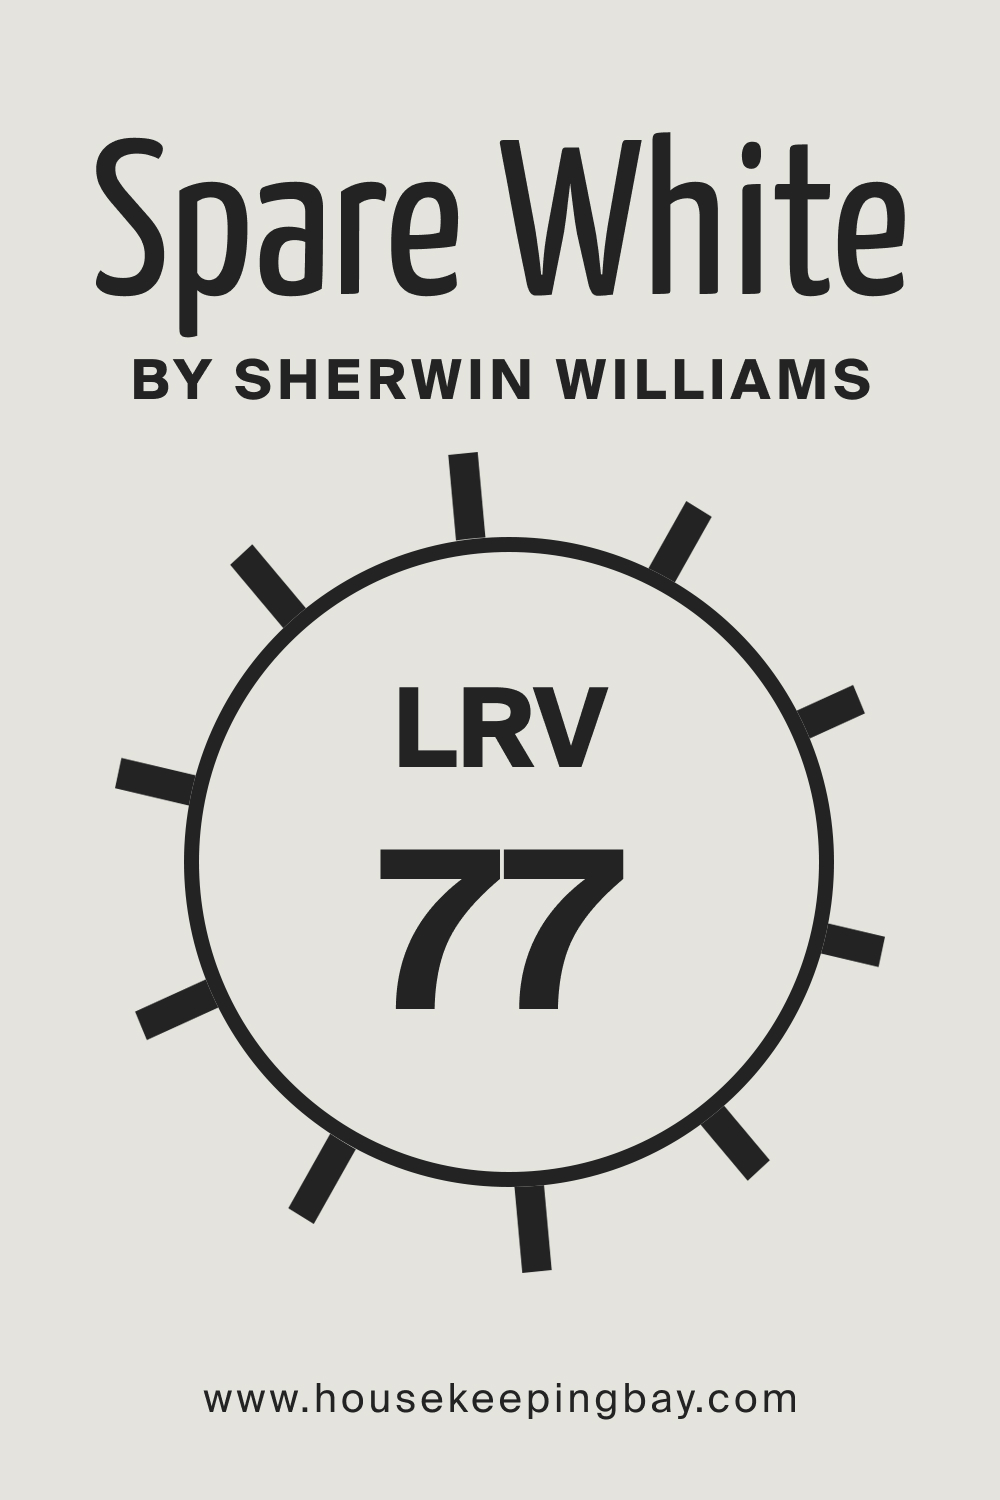 SW Spare White by Sherwin Williams. LRV – 77